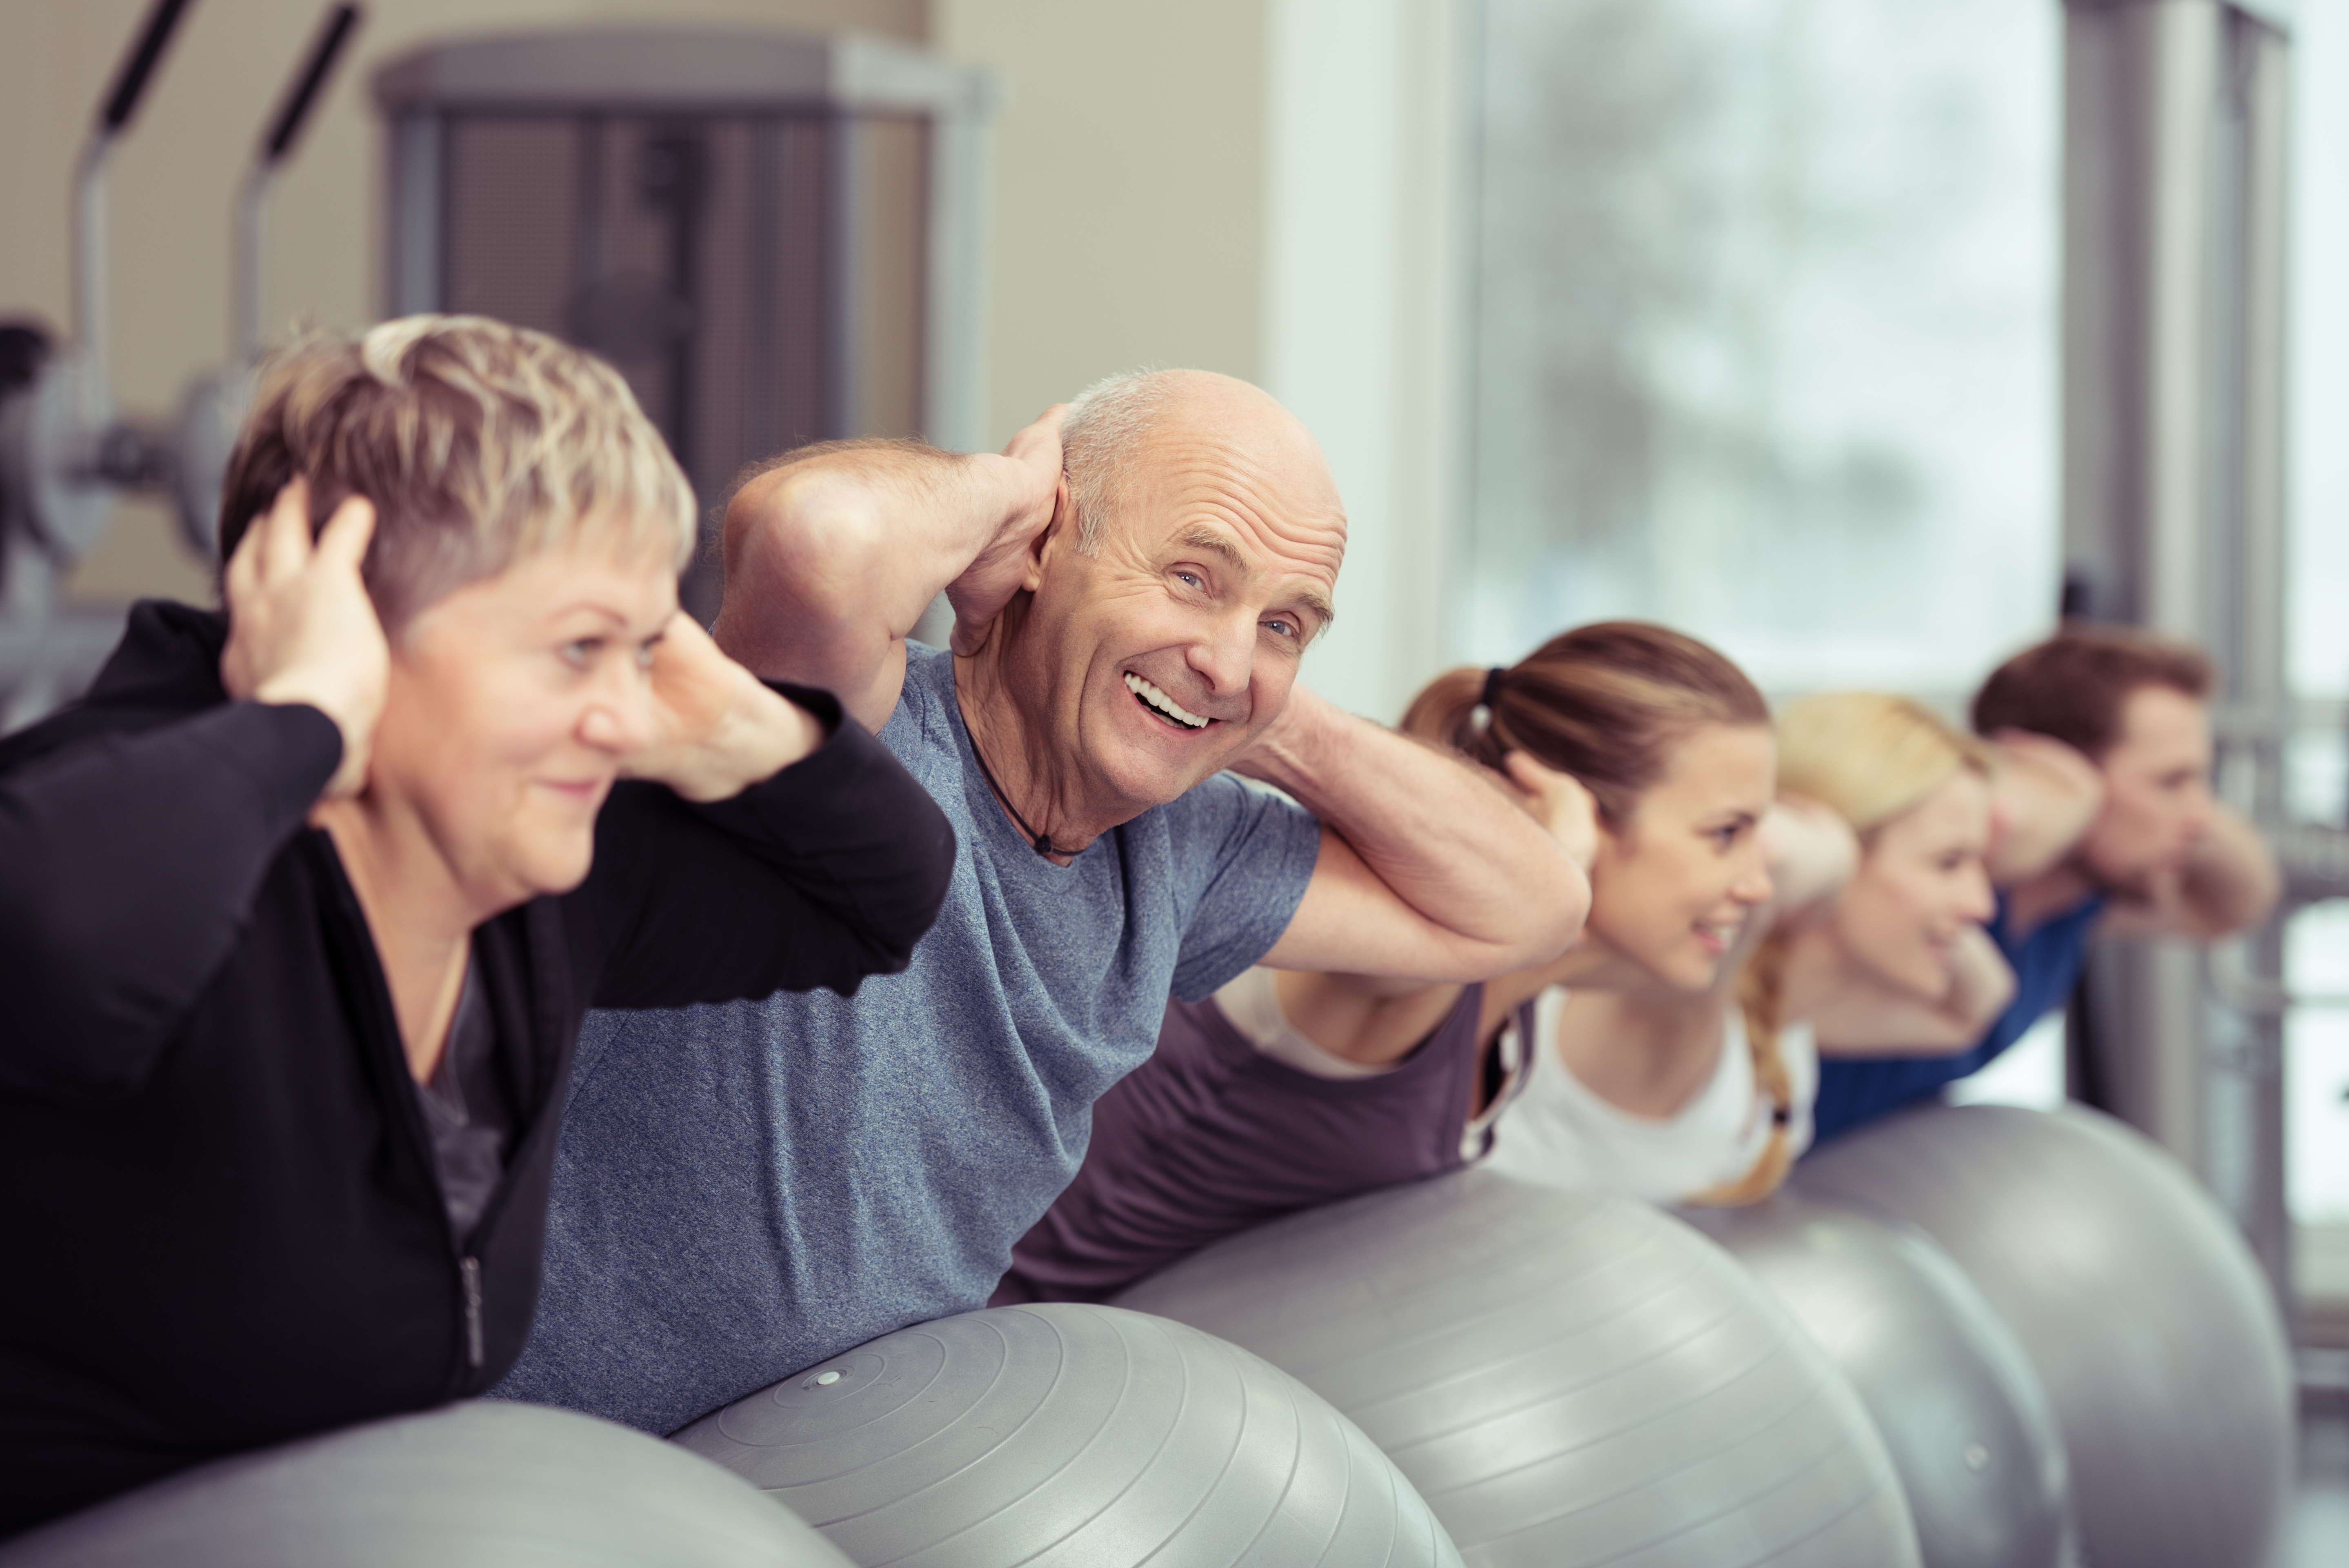 An older man participating in an exercise class with other people